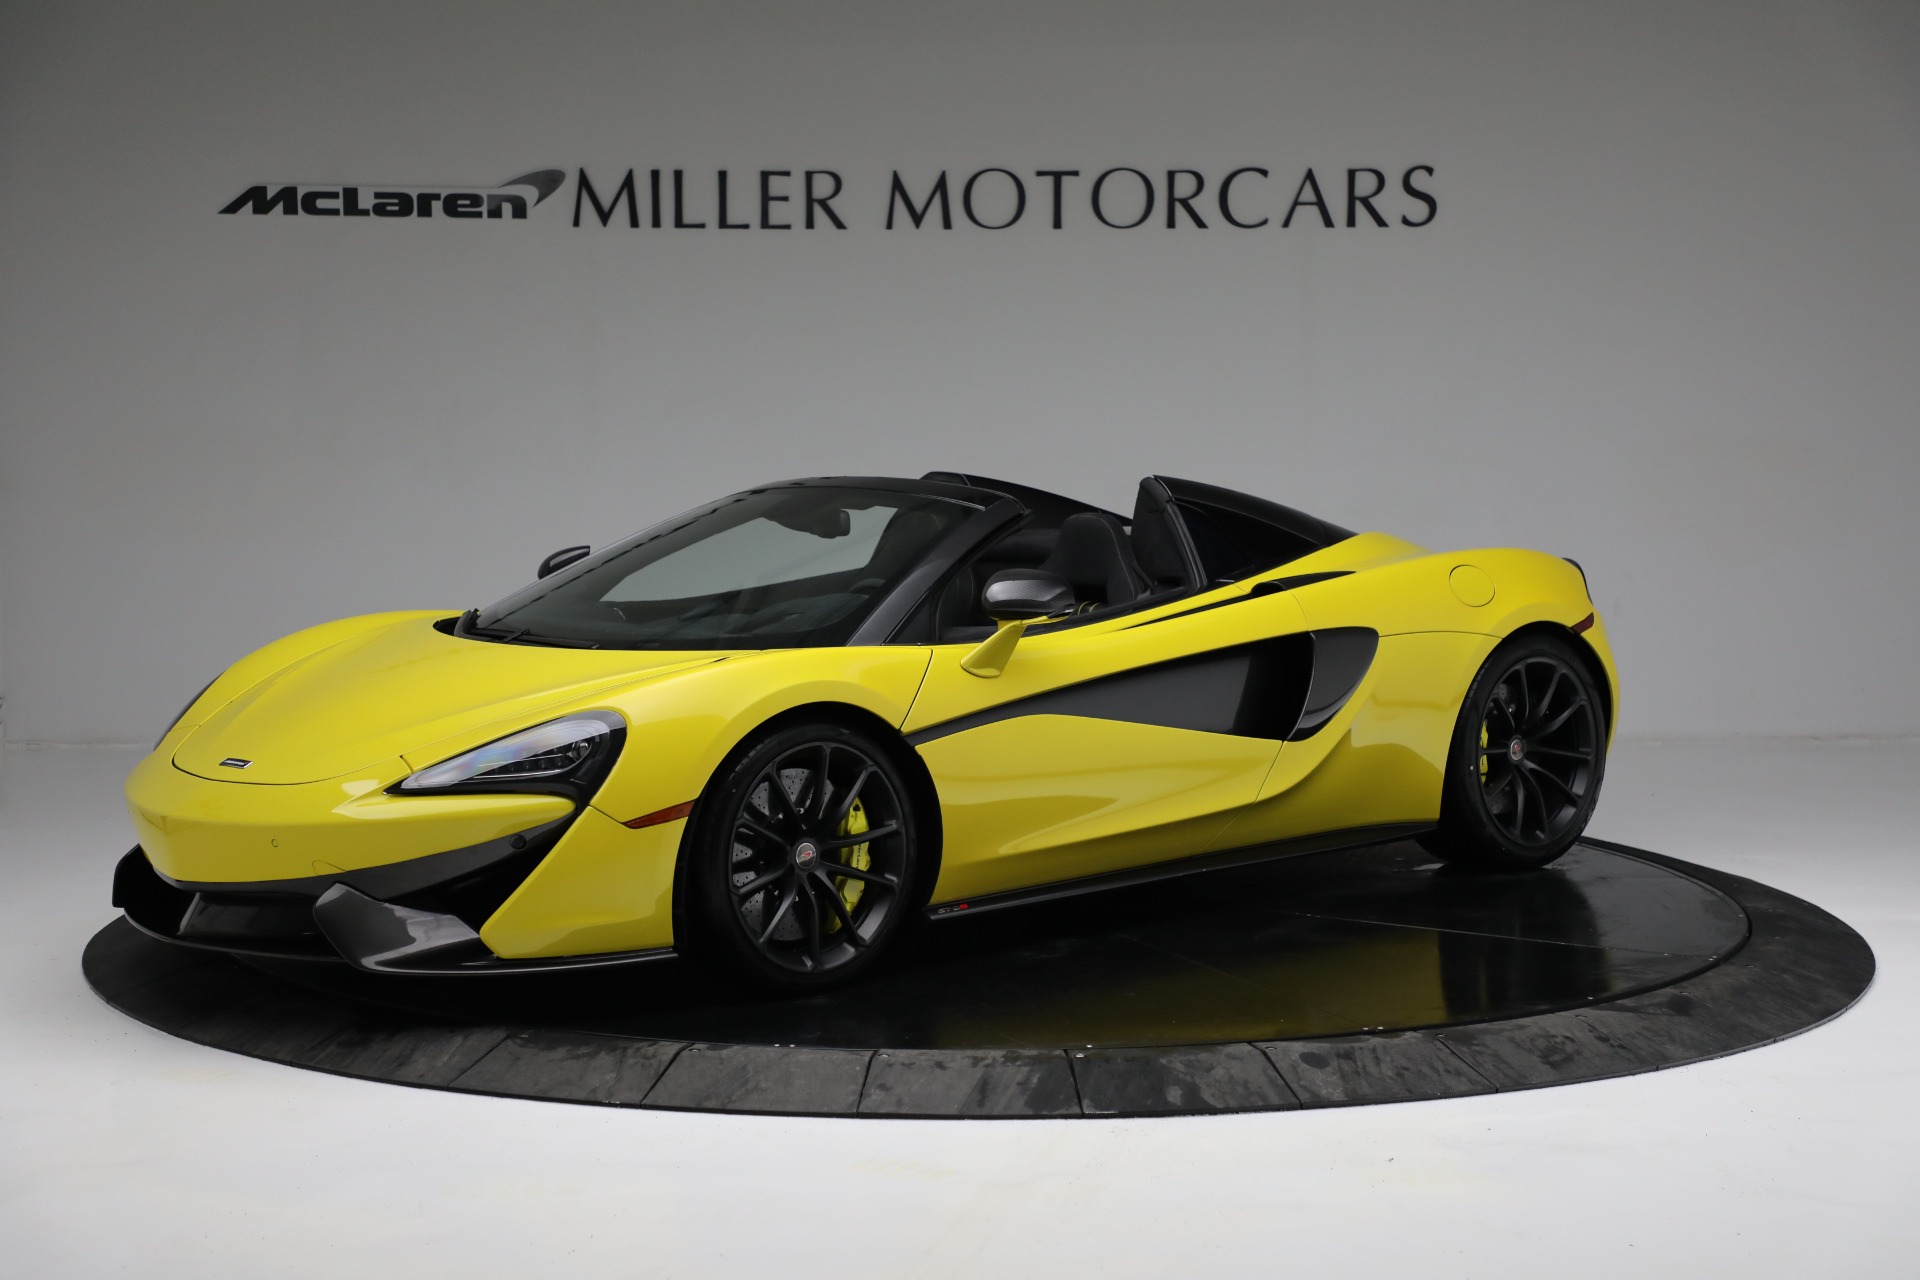 Used 2018 McLaren 570S Spider for sale $202,900 at Aston Martin of Greenwich in Greenwich CT 06830 1